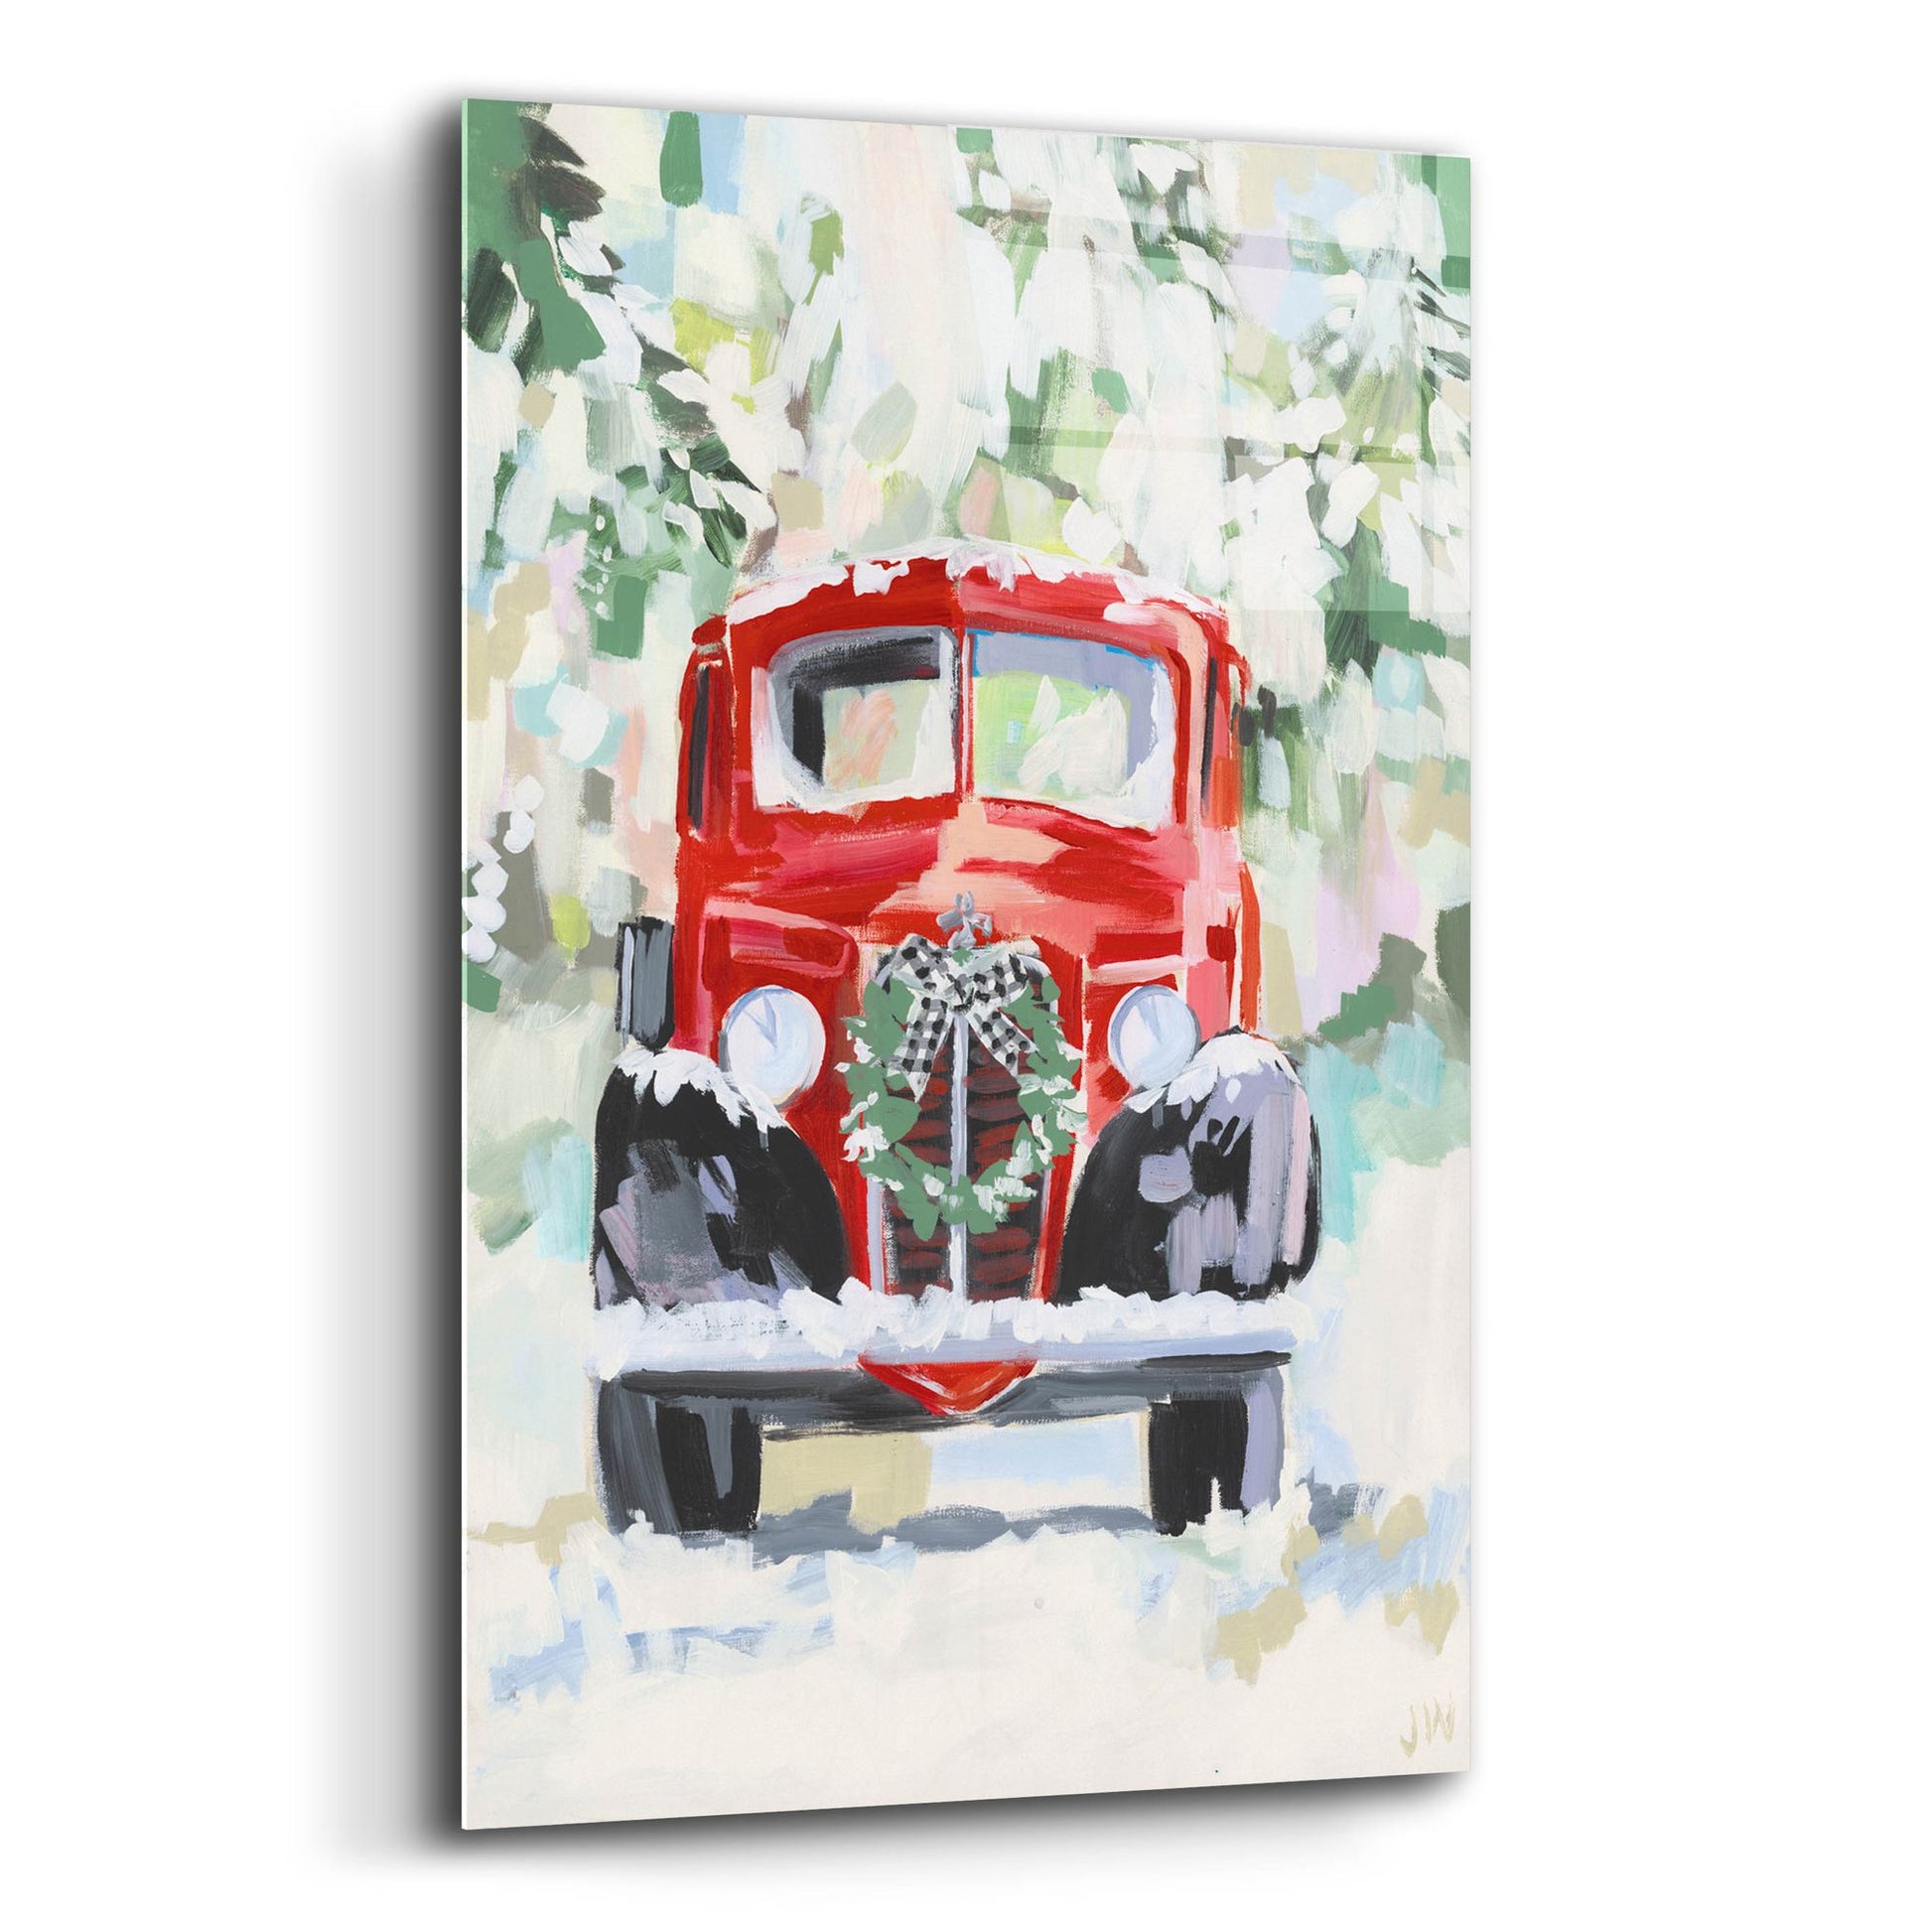 Epic Art 'Red Vintage Truck with Wreath' by Jenny Westenhofer, Acrylic Glass Wall Art,16x24